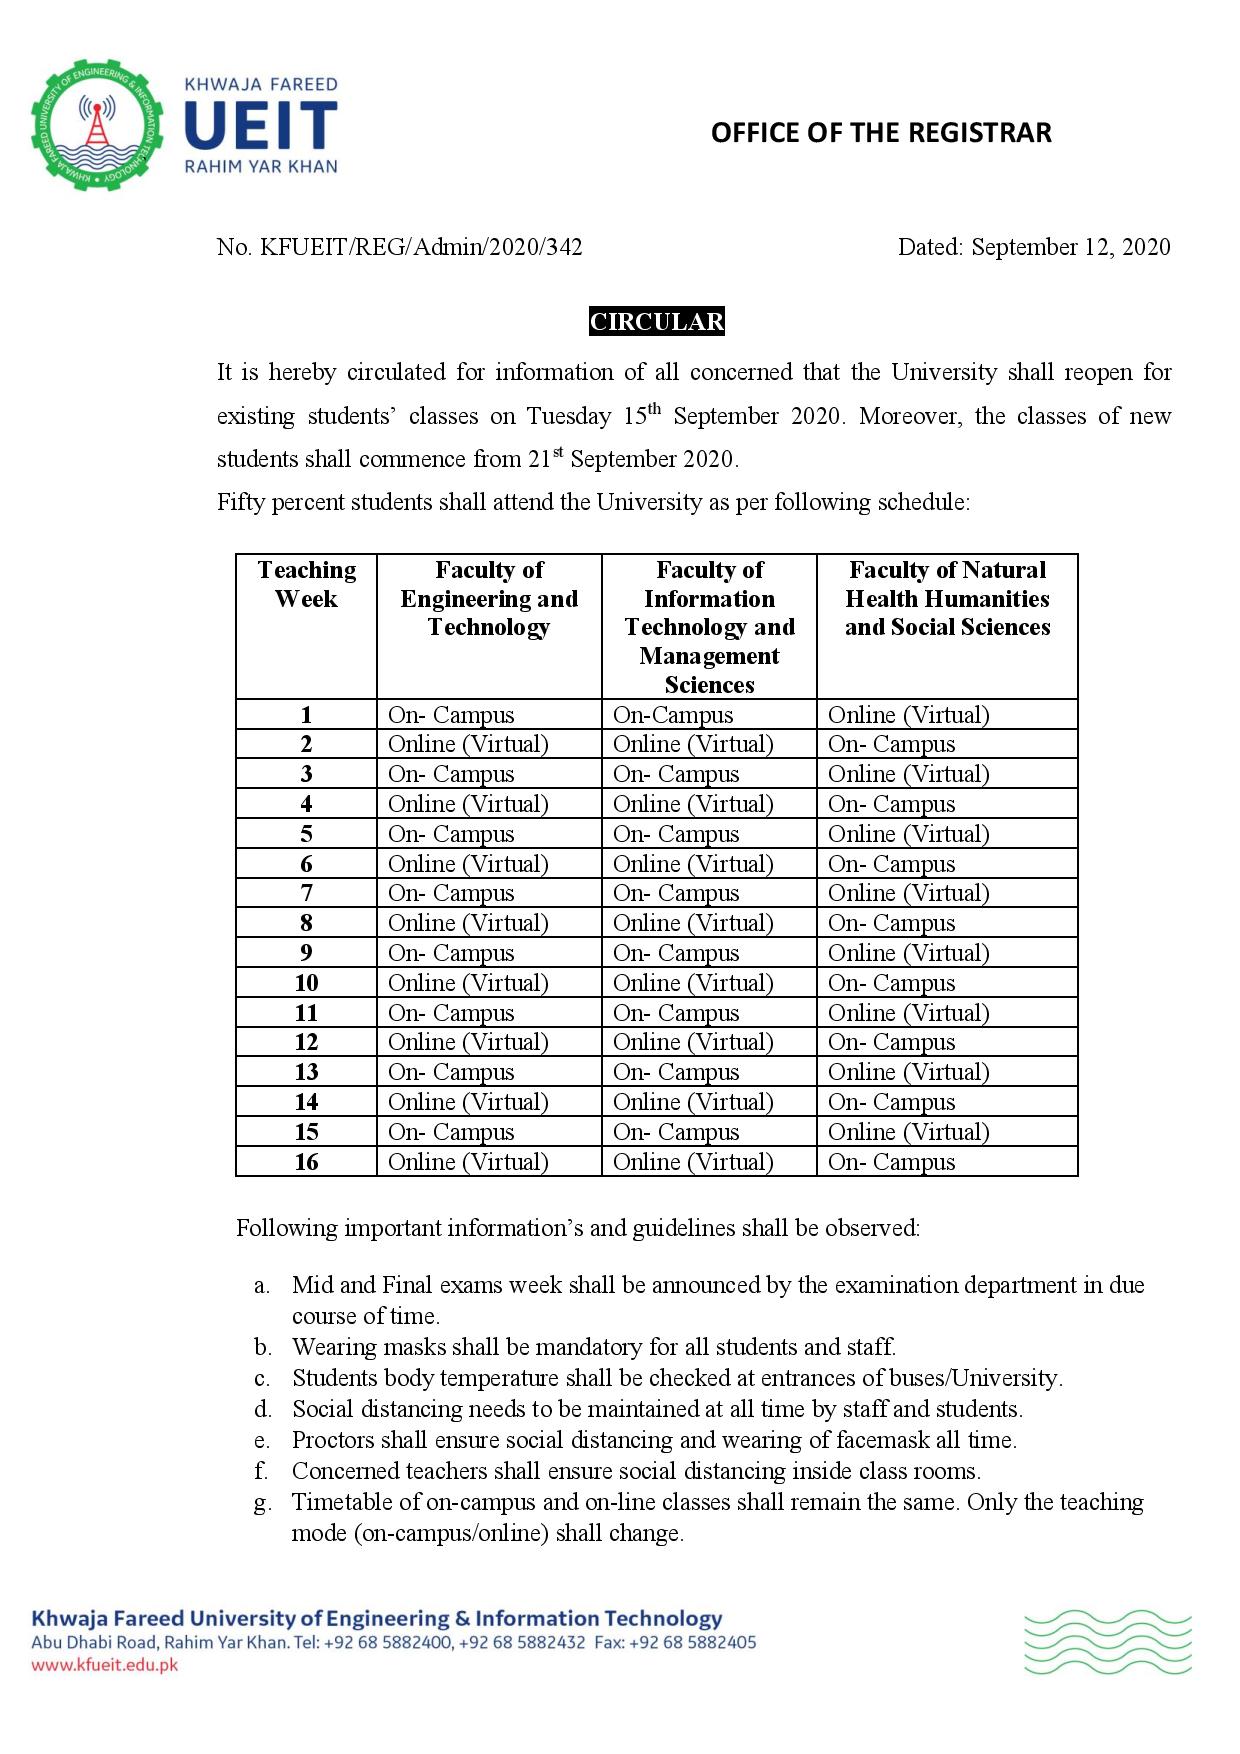 Reopeing of Classes Circular-1-2-page-001